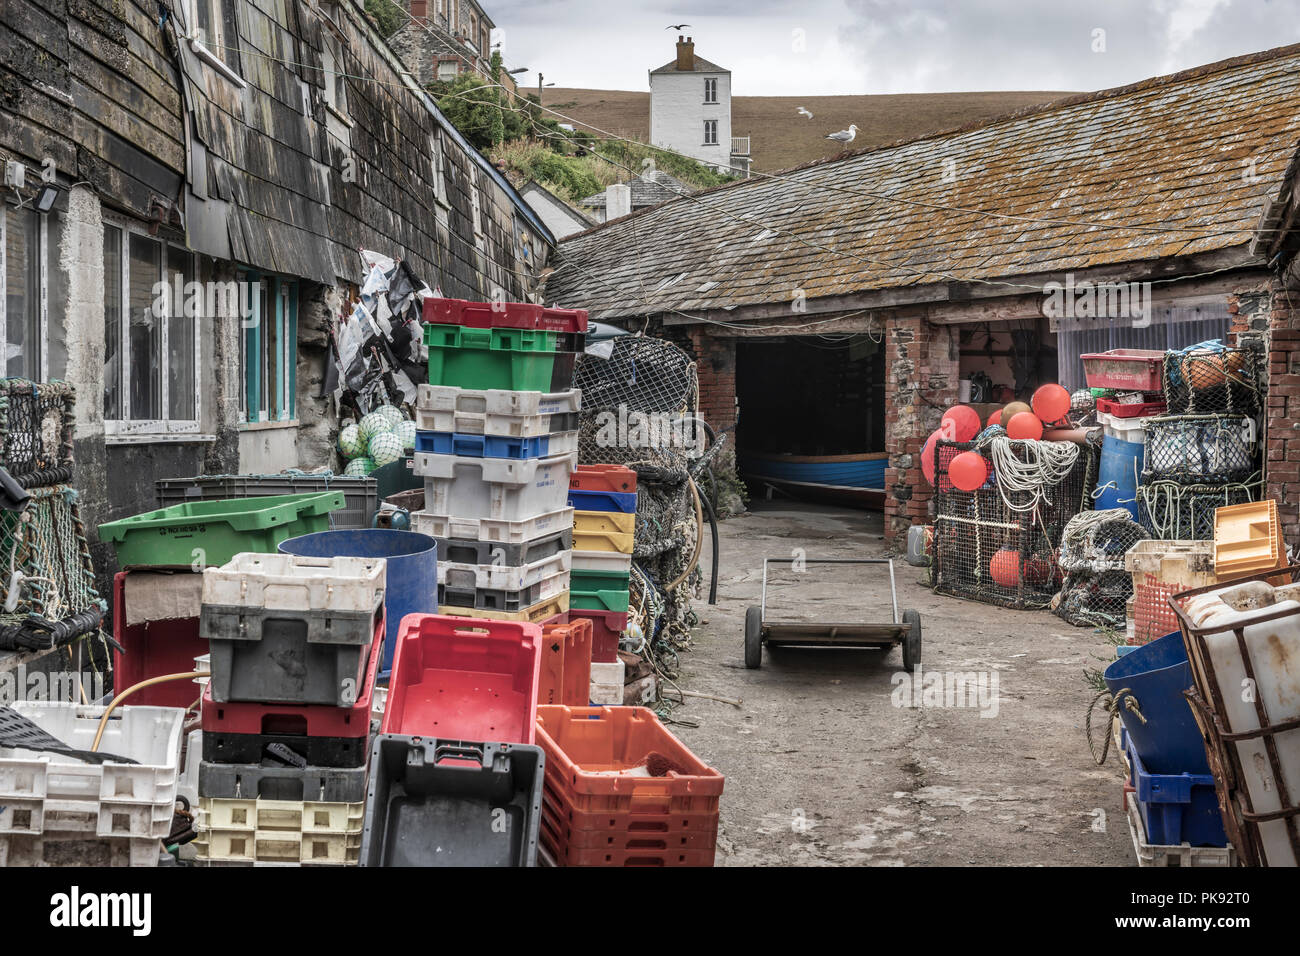 The Fishmonger's yard in the picturesque Cornish coastal village of Port Isaac, famous for the popular television series 'Doc Martin'. Stock Photo